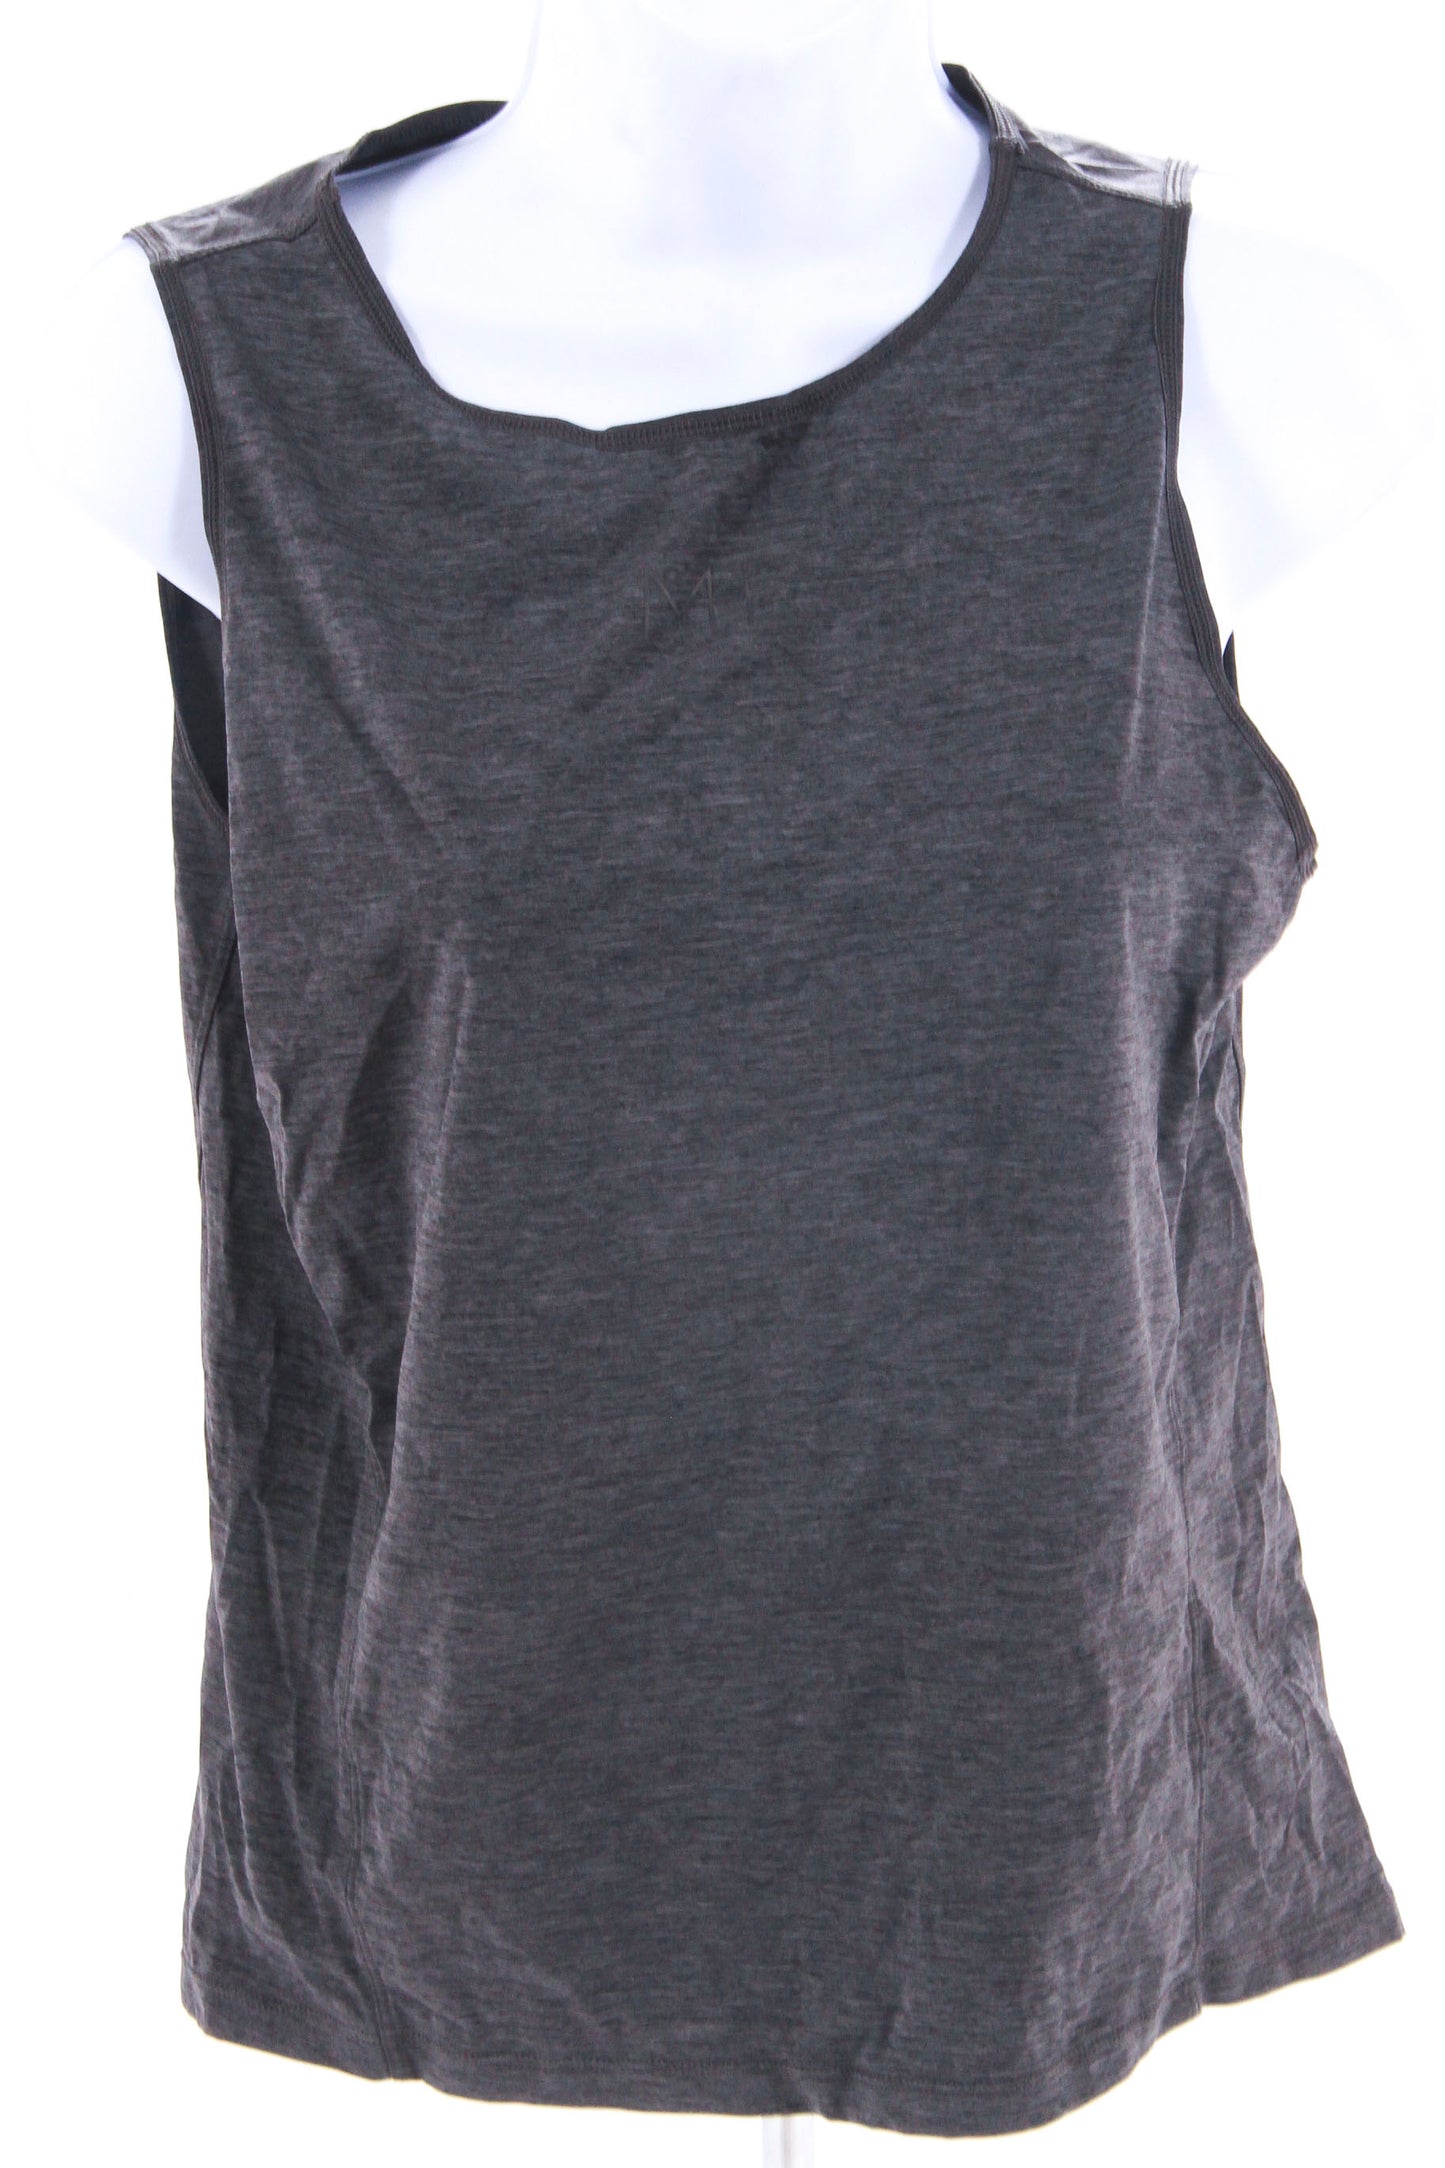 NEW (without tags) Machines for Freedom Luxe Sleeveless Base Layer Women's Large